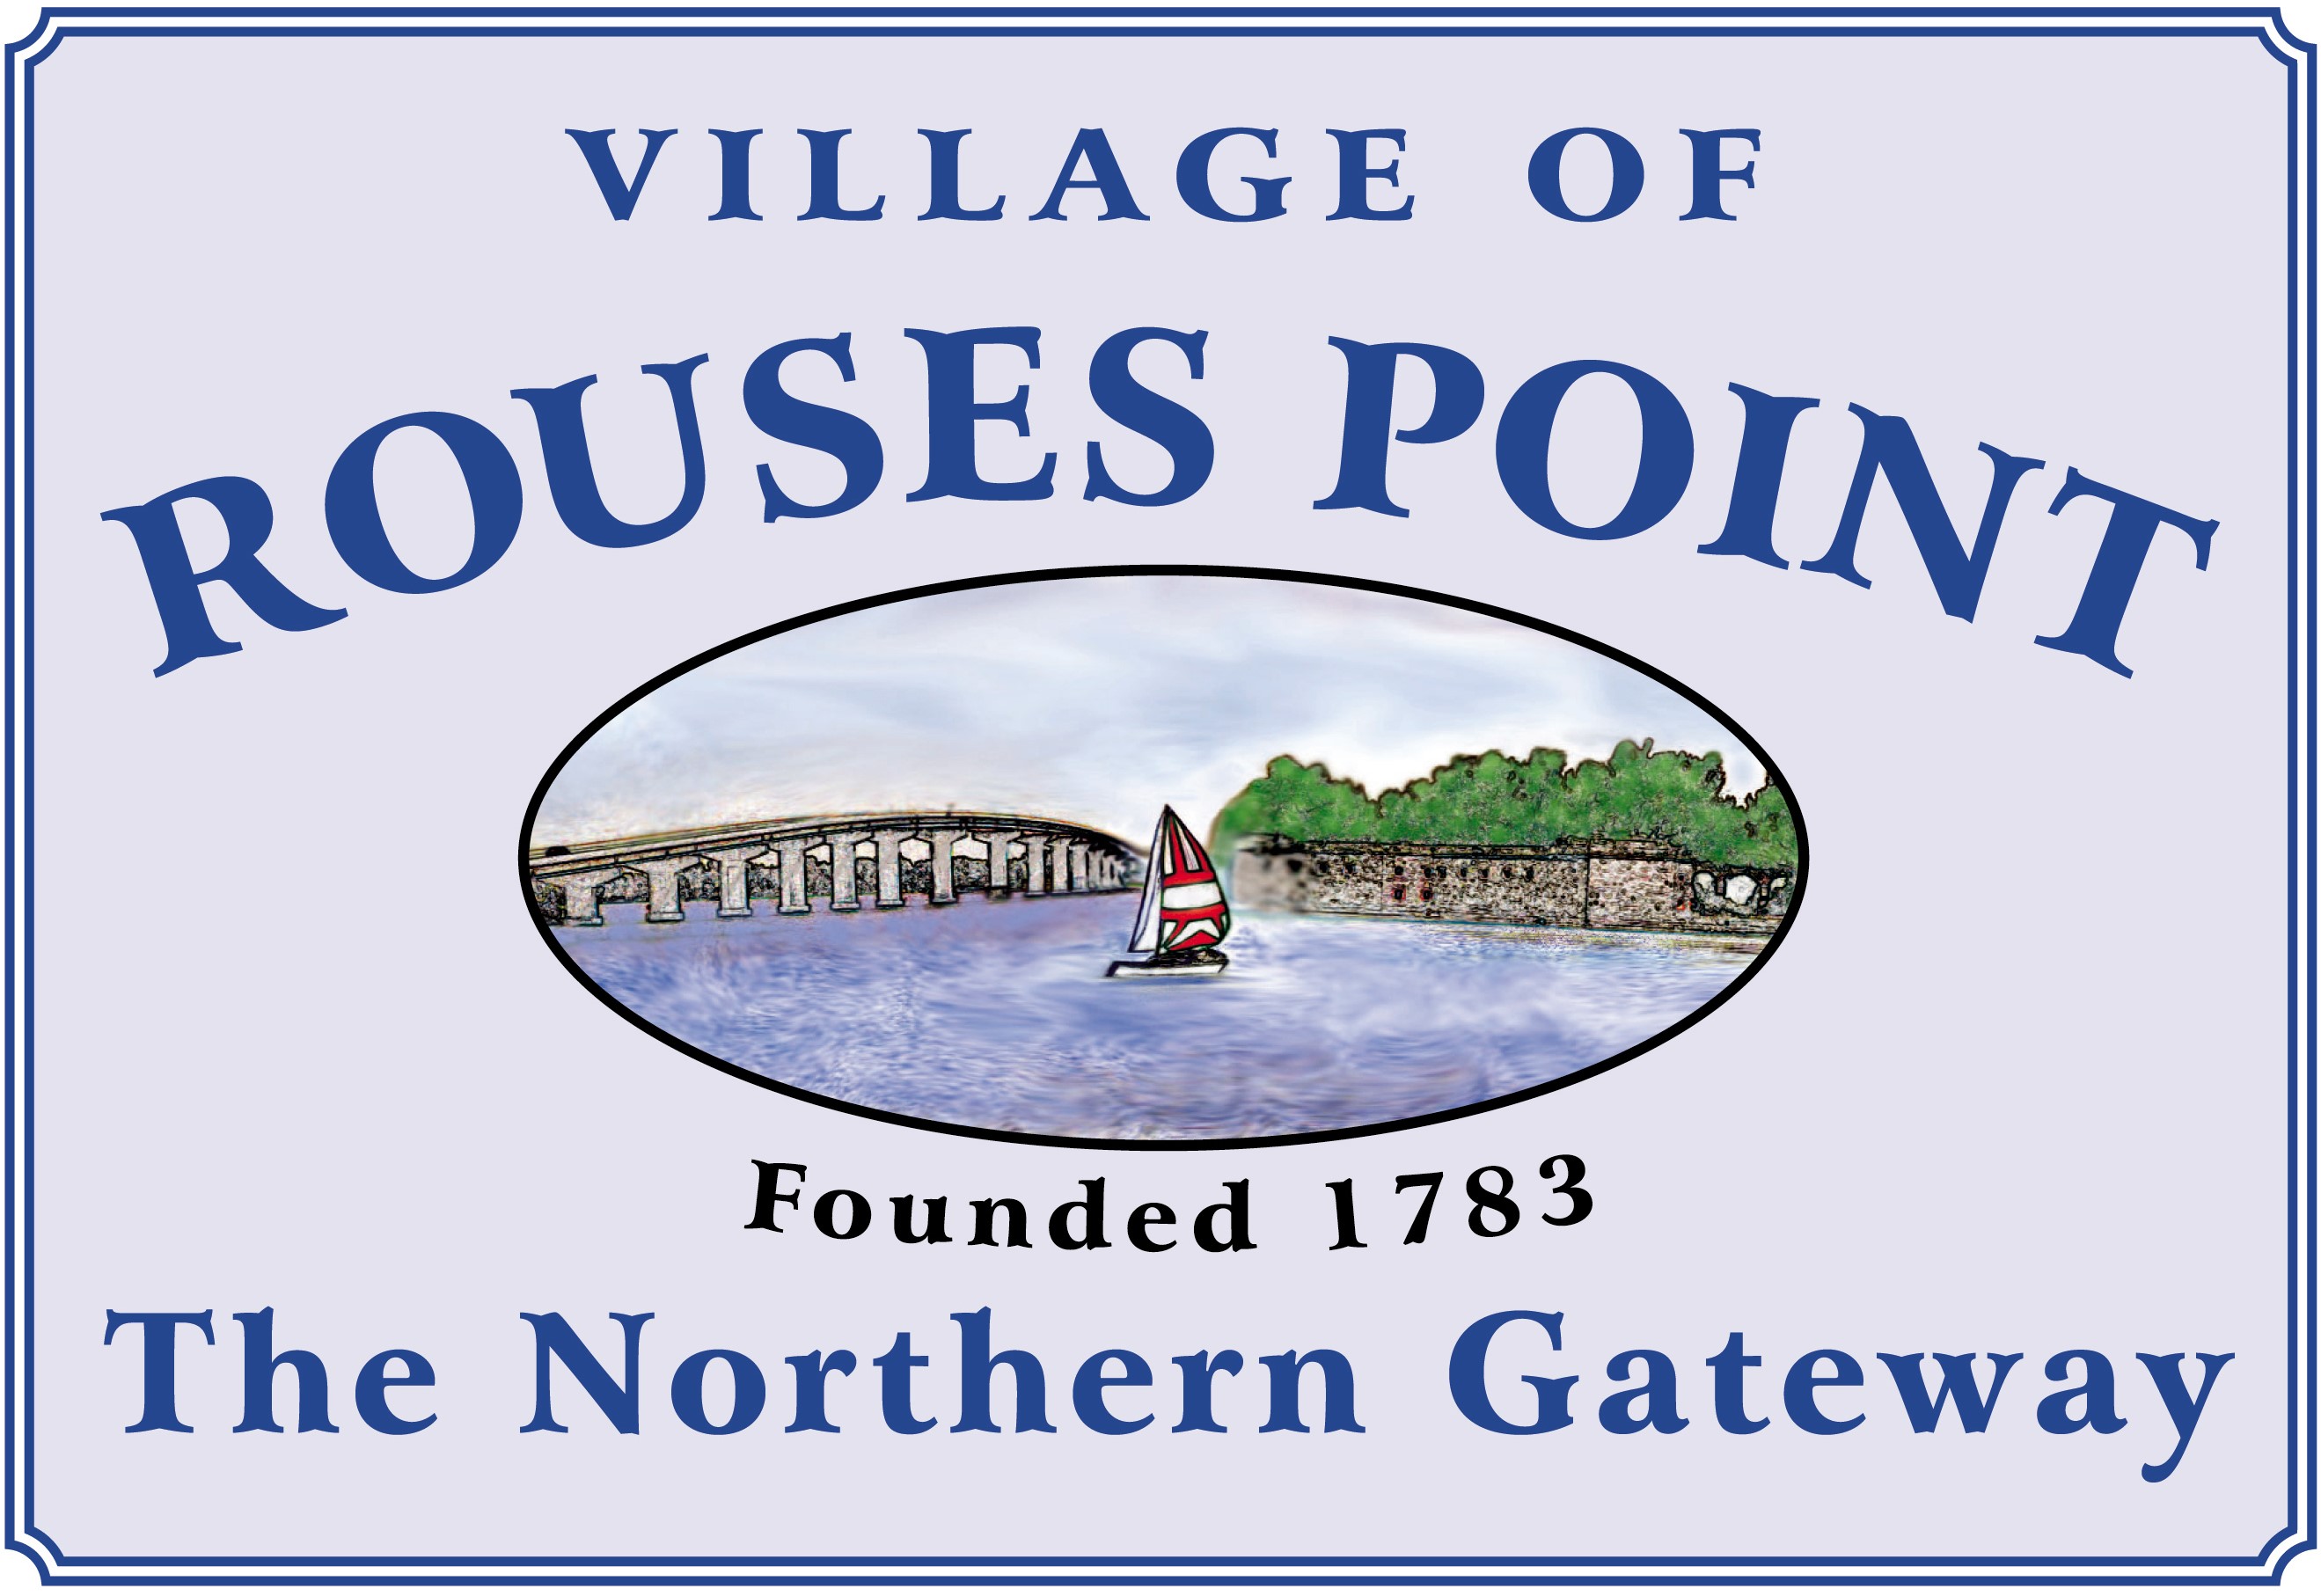 Village of Rouses Point - The Northern Gateway